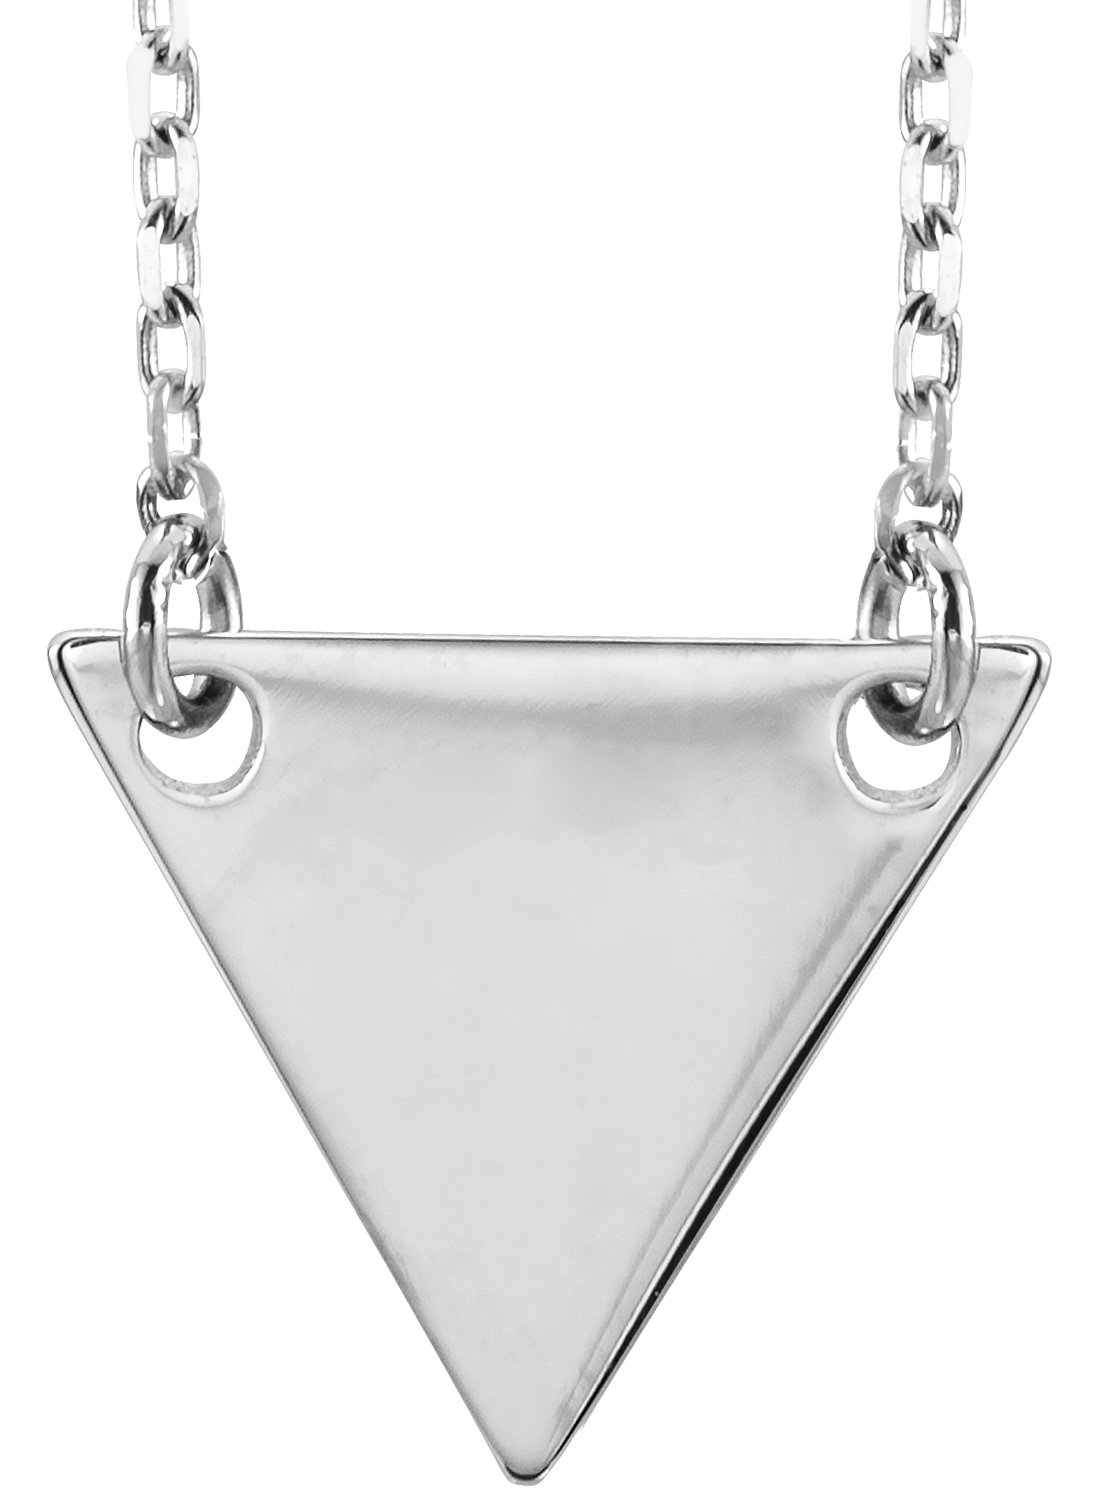 Sterling Silver Geometric 18 inch Necklace Ref. 14199733